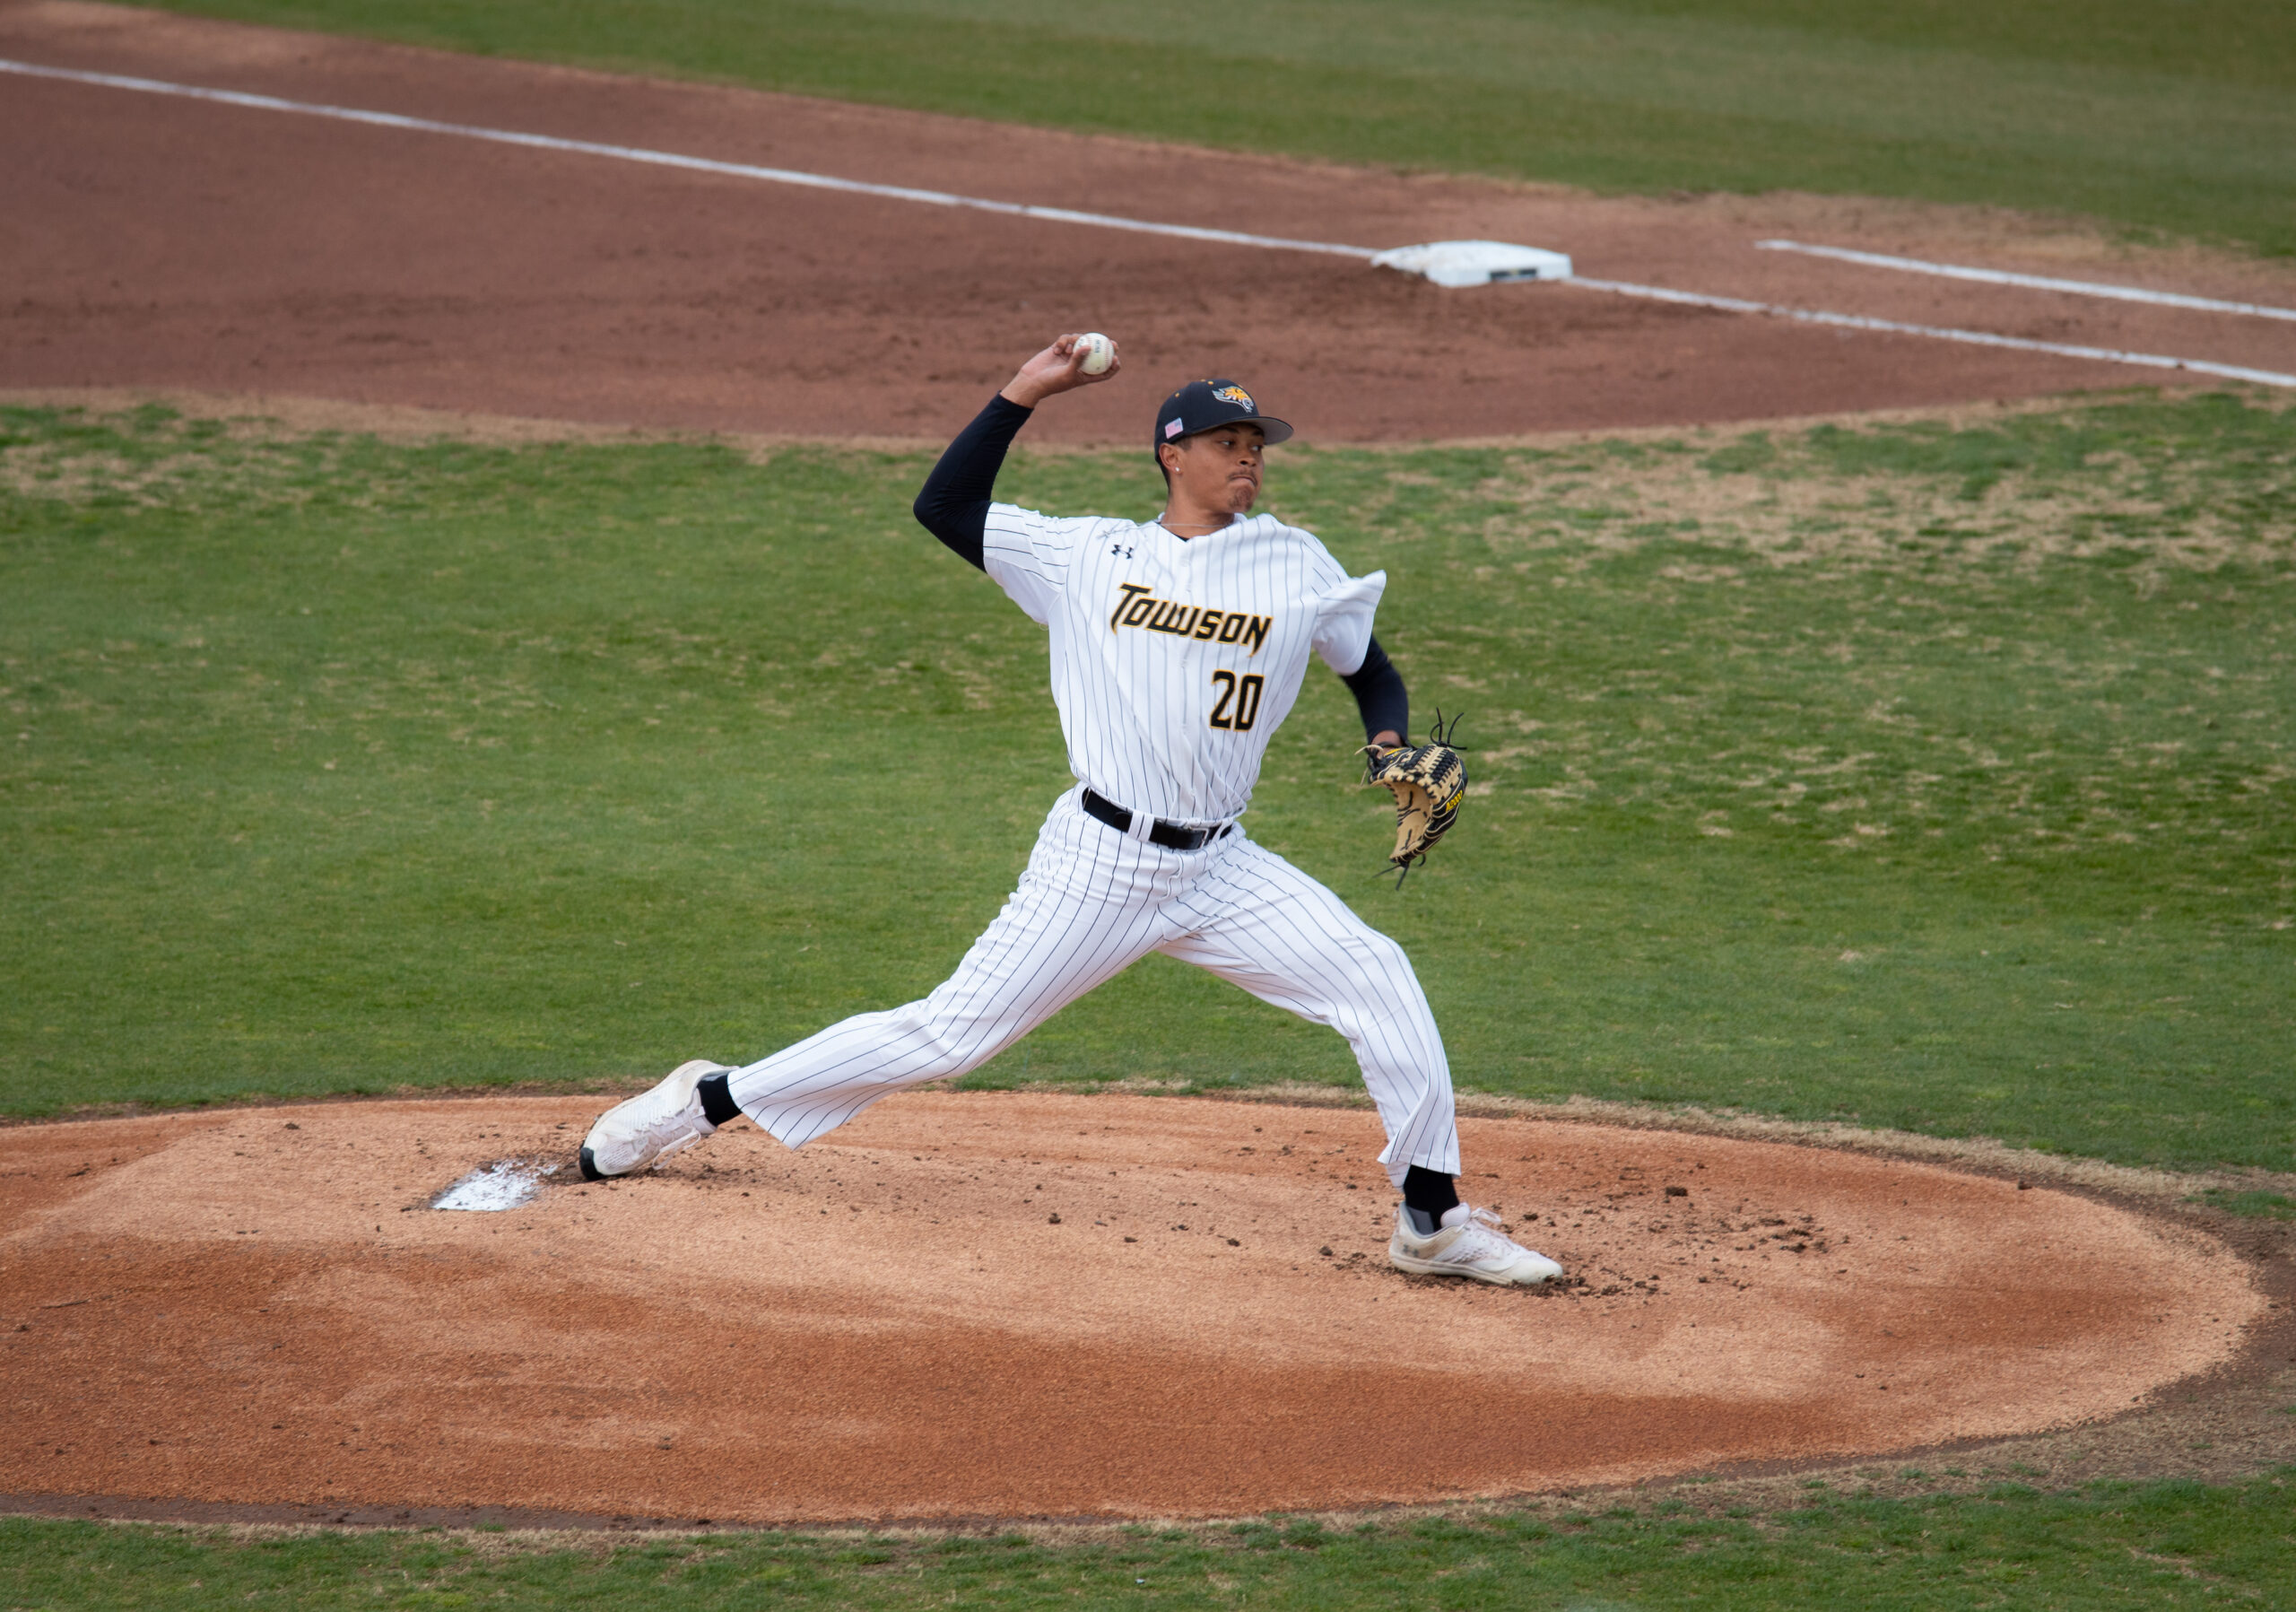 Towson Baseball drops fourthstraight game in close contest against